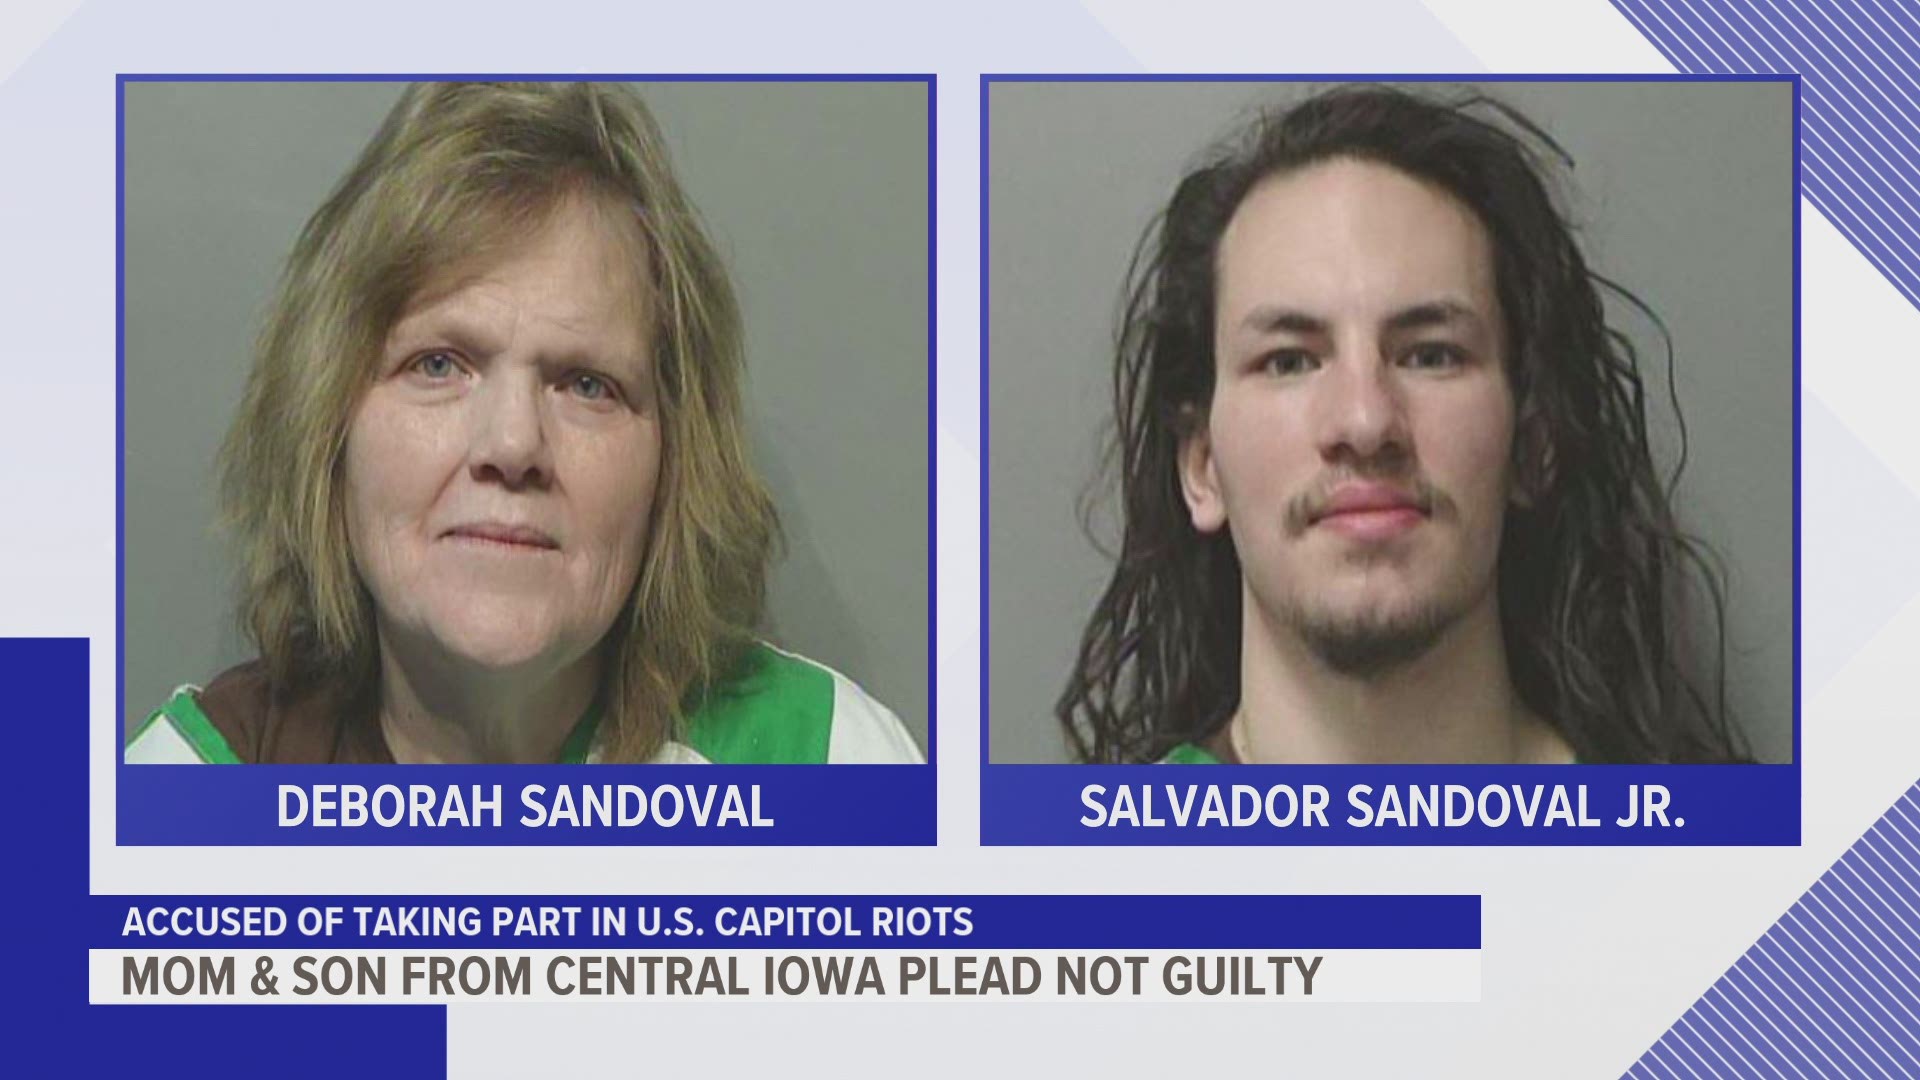 Deborah Sandoval and her son Salvador Sandoval Jr. each face multiple charges in connection to the U.S. Capitol riot.